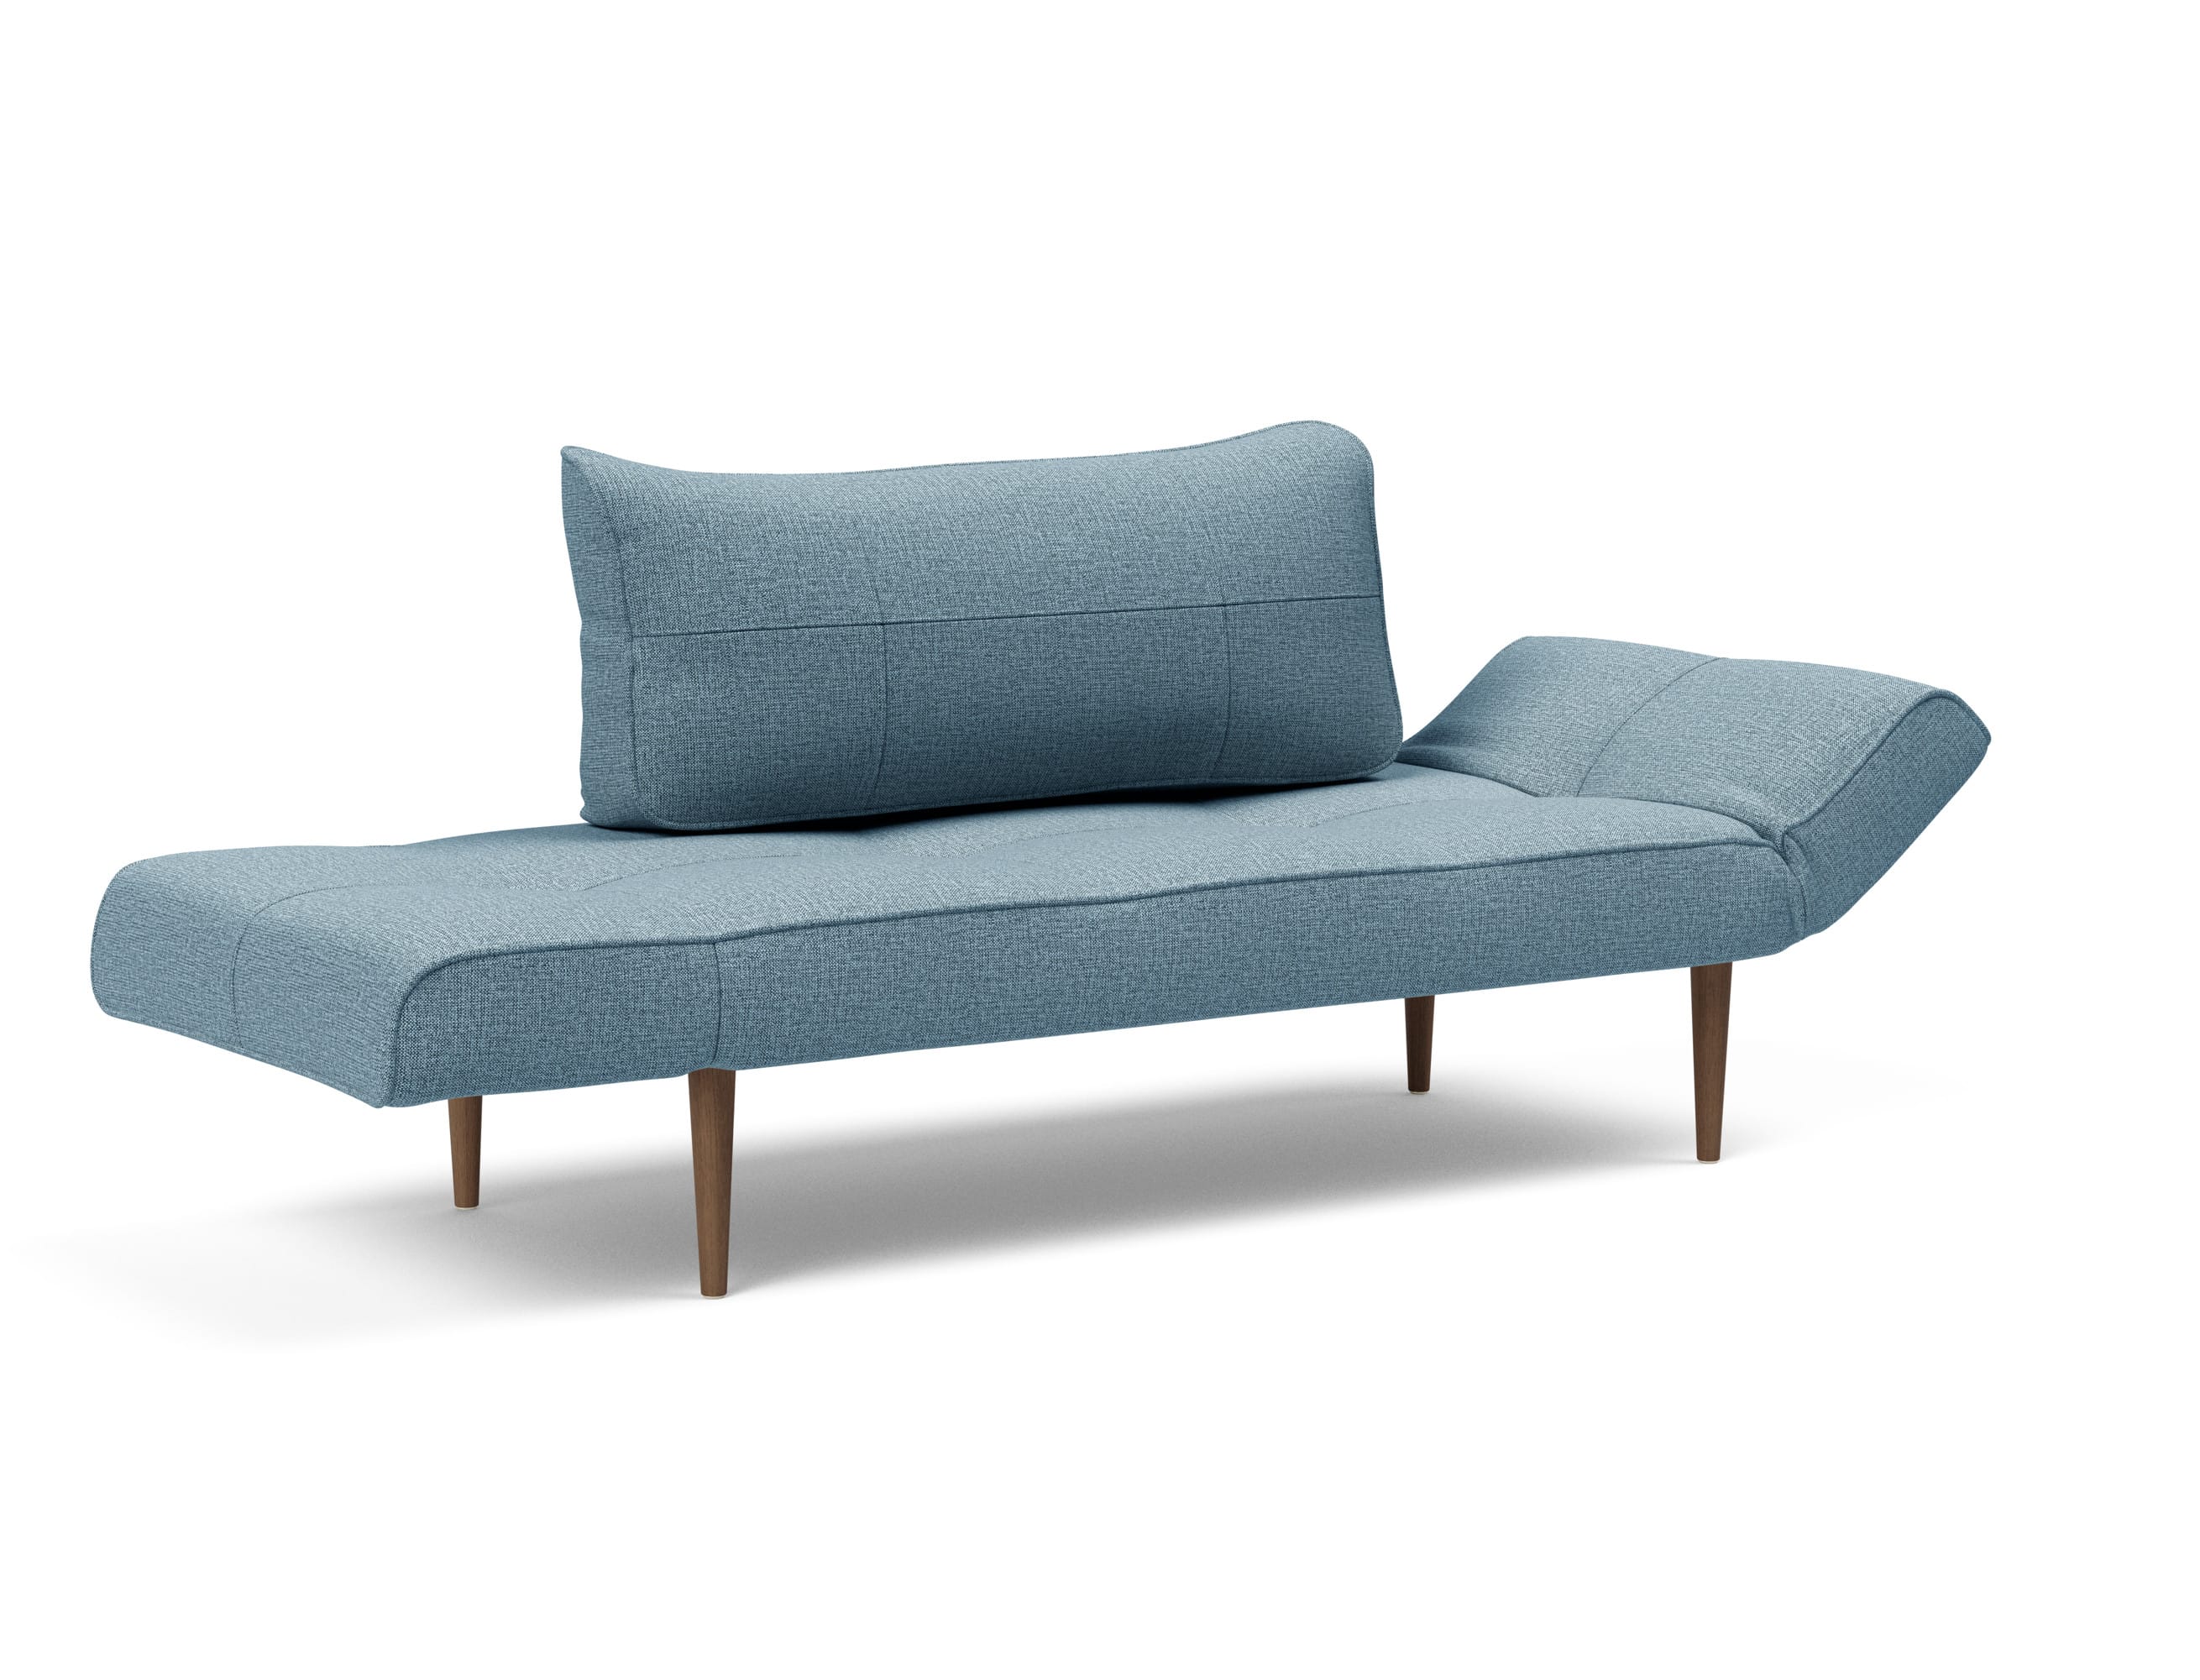 Dance Blue Mixed Deluxe Sofa by Daybed Light Bed Innovation Zeal